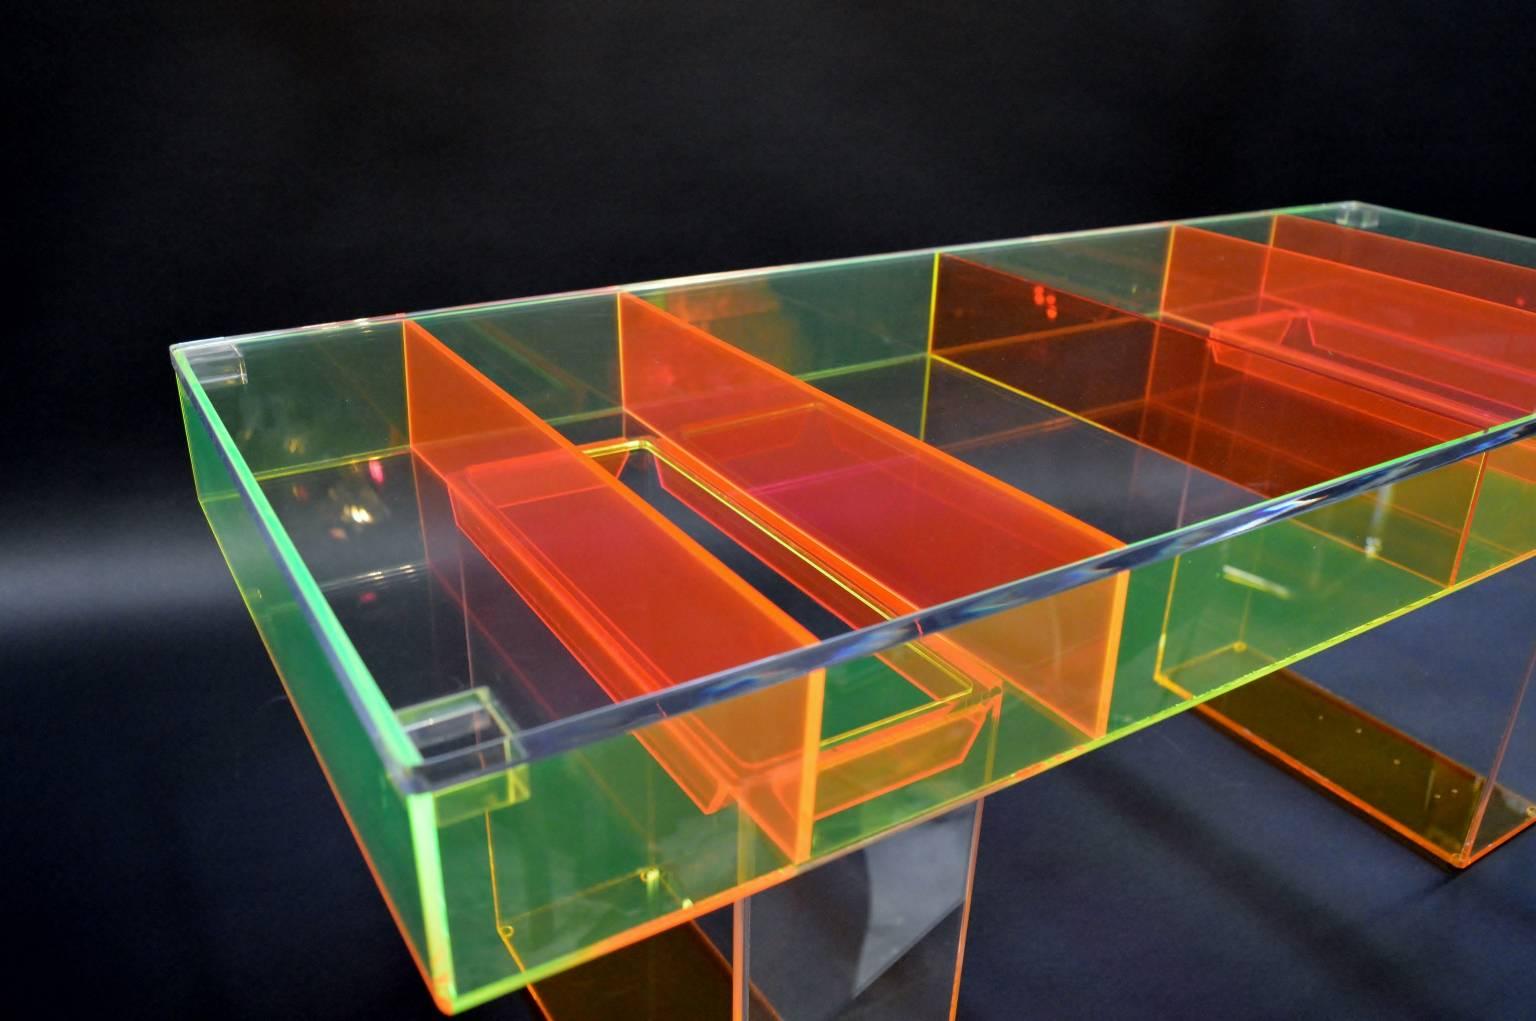 Custom multicolored Lucite coffee table. The tabletop base is lime green with bright orange legs and dividing pieces. The clear Lucite top of the table is removable, to place collectors items inside to present.